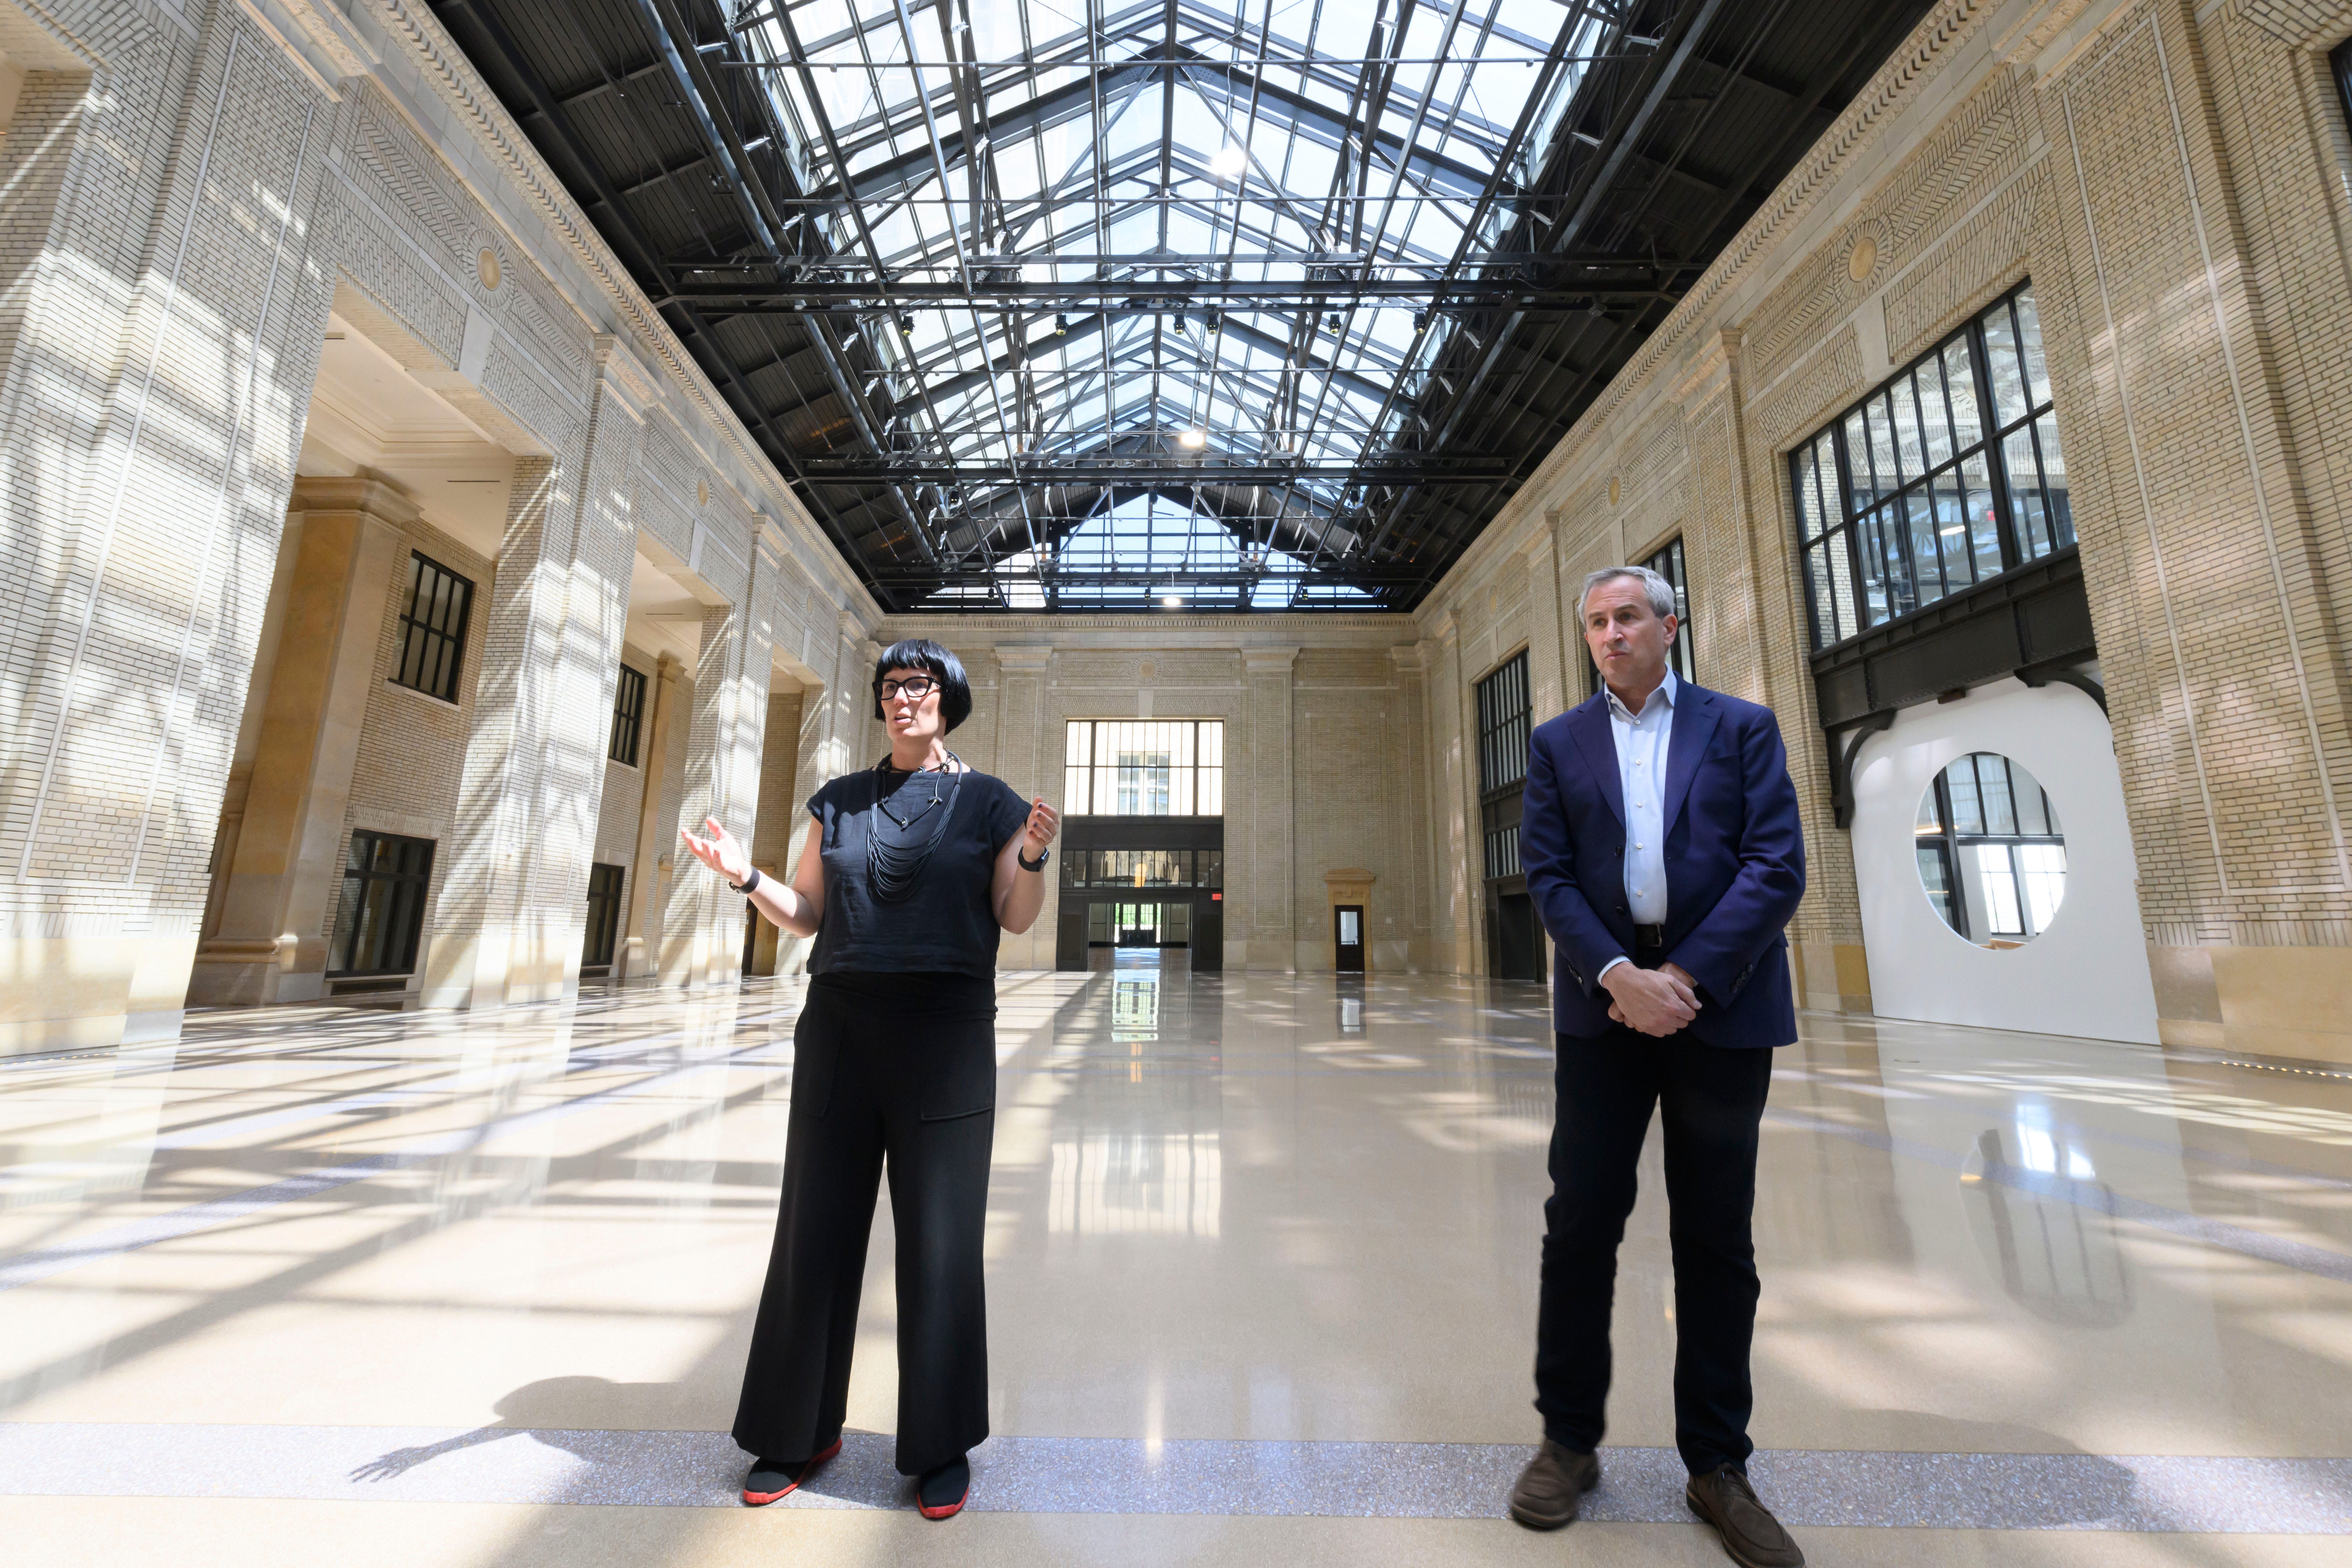 Melissa Dittmer, Head of Place for Michigan Central, left, and Josh Sirefman, the Chief Executive Officer of Michigan Central, stand inside the renovated atrium at the Michigan Central Station, in Detroit, May 13, 2024.